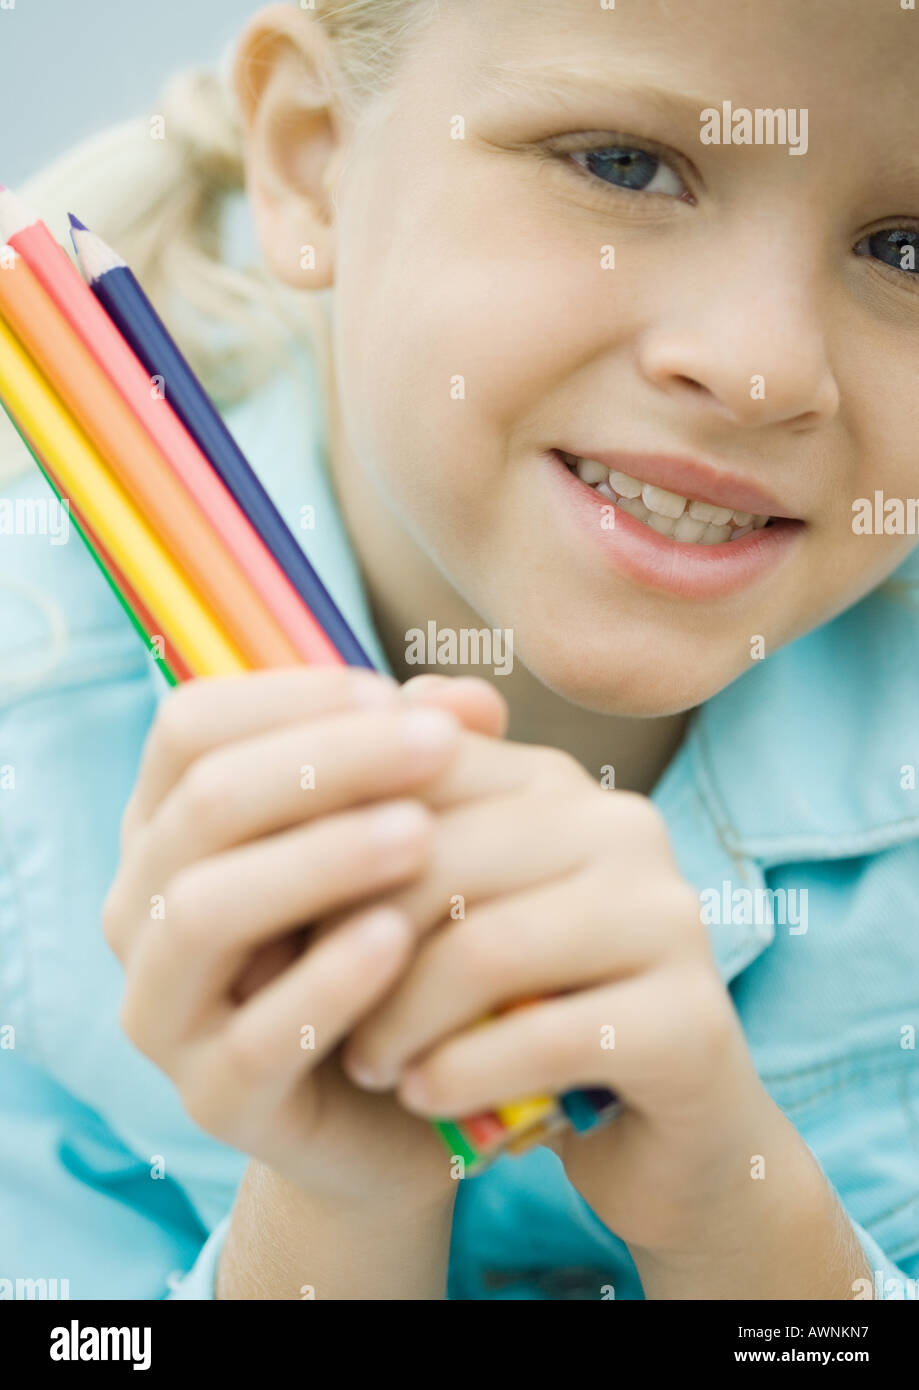 Girl holding colored pencils Stock Photo